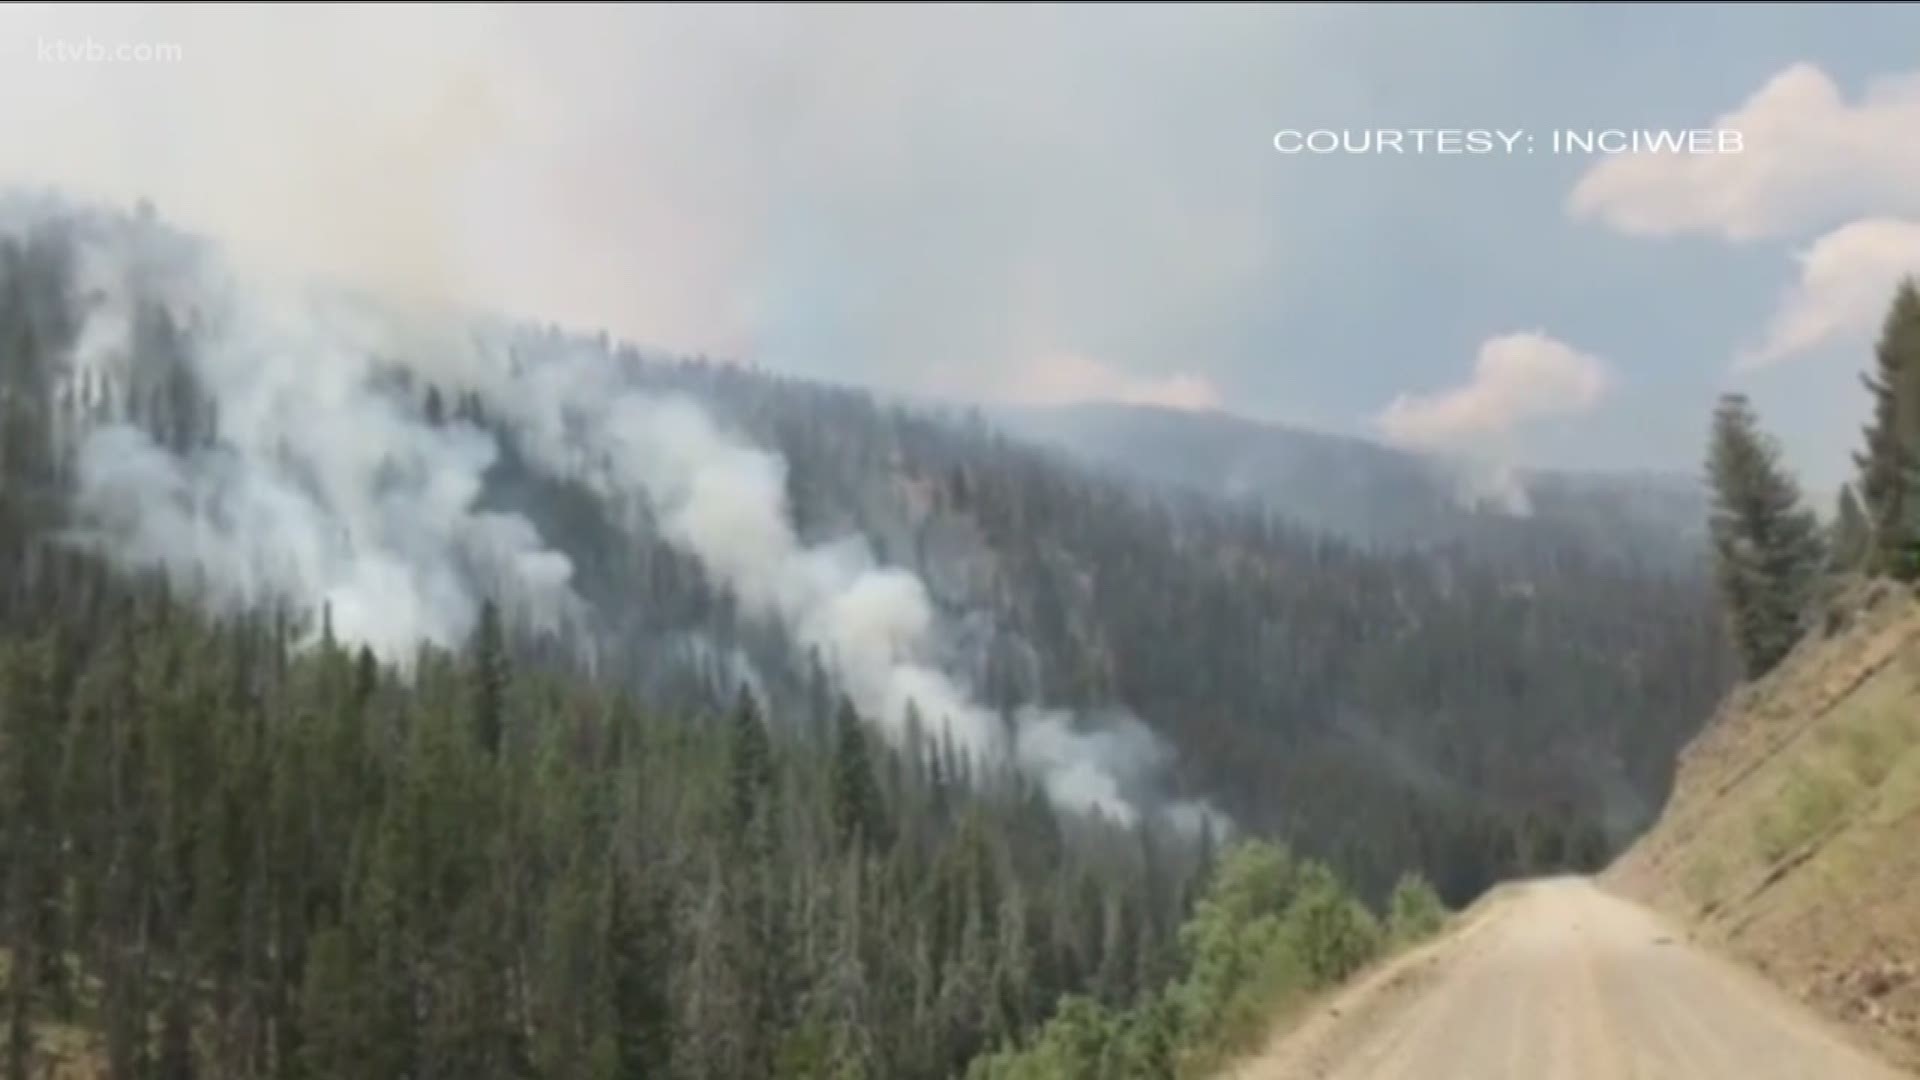 The latest updates on several wildfires burning in the state.